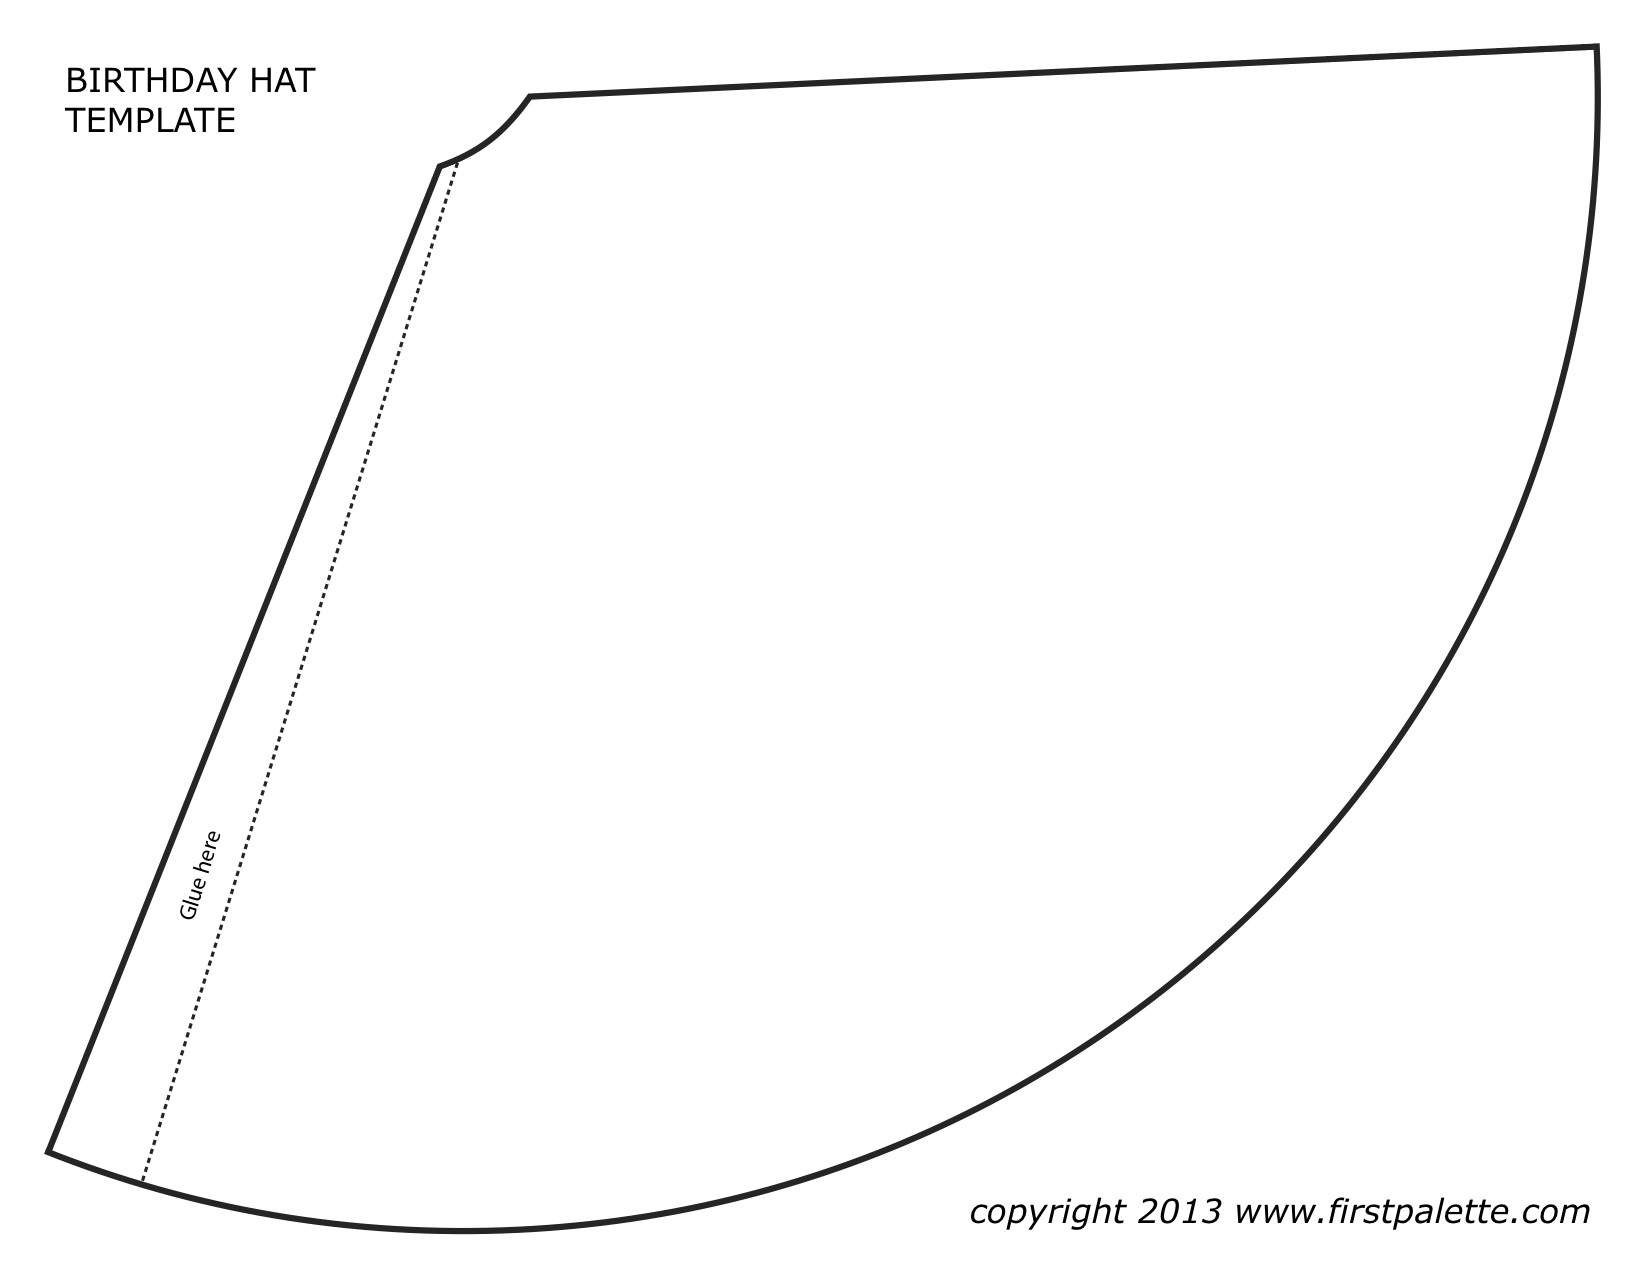 large party hat template